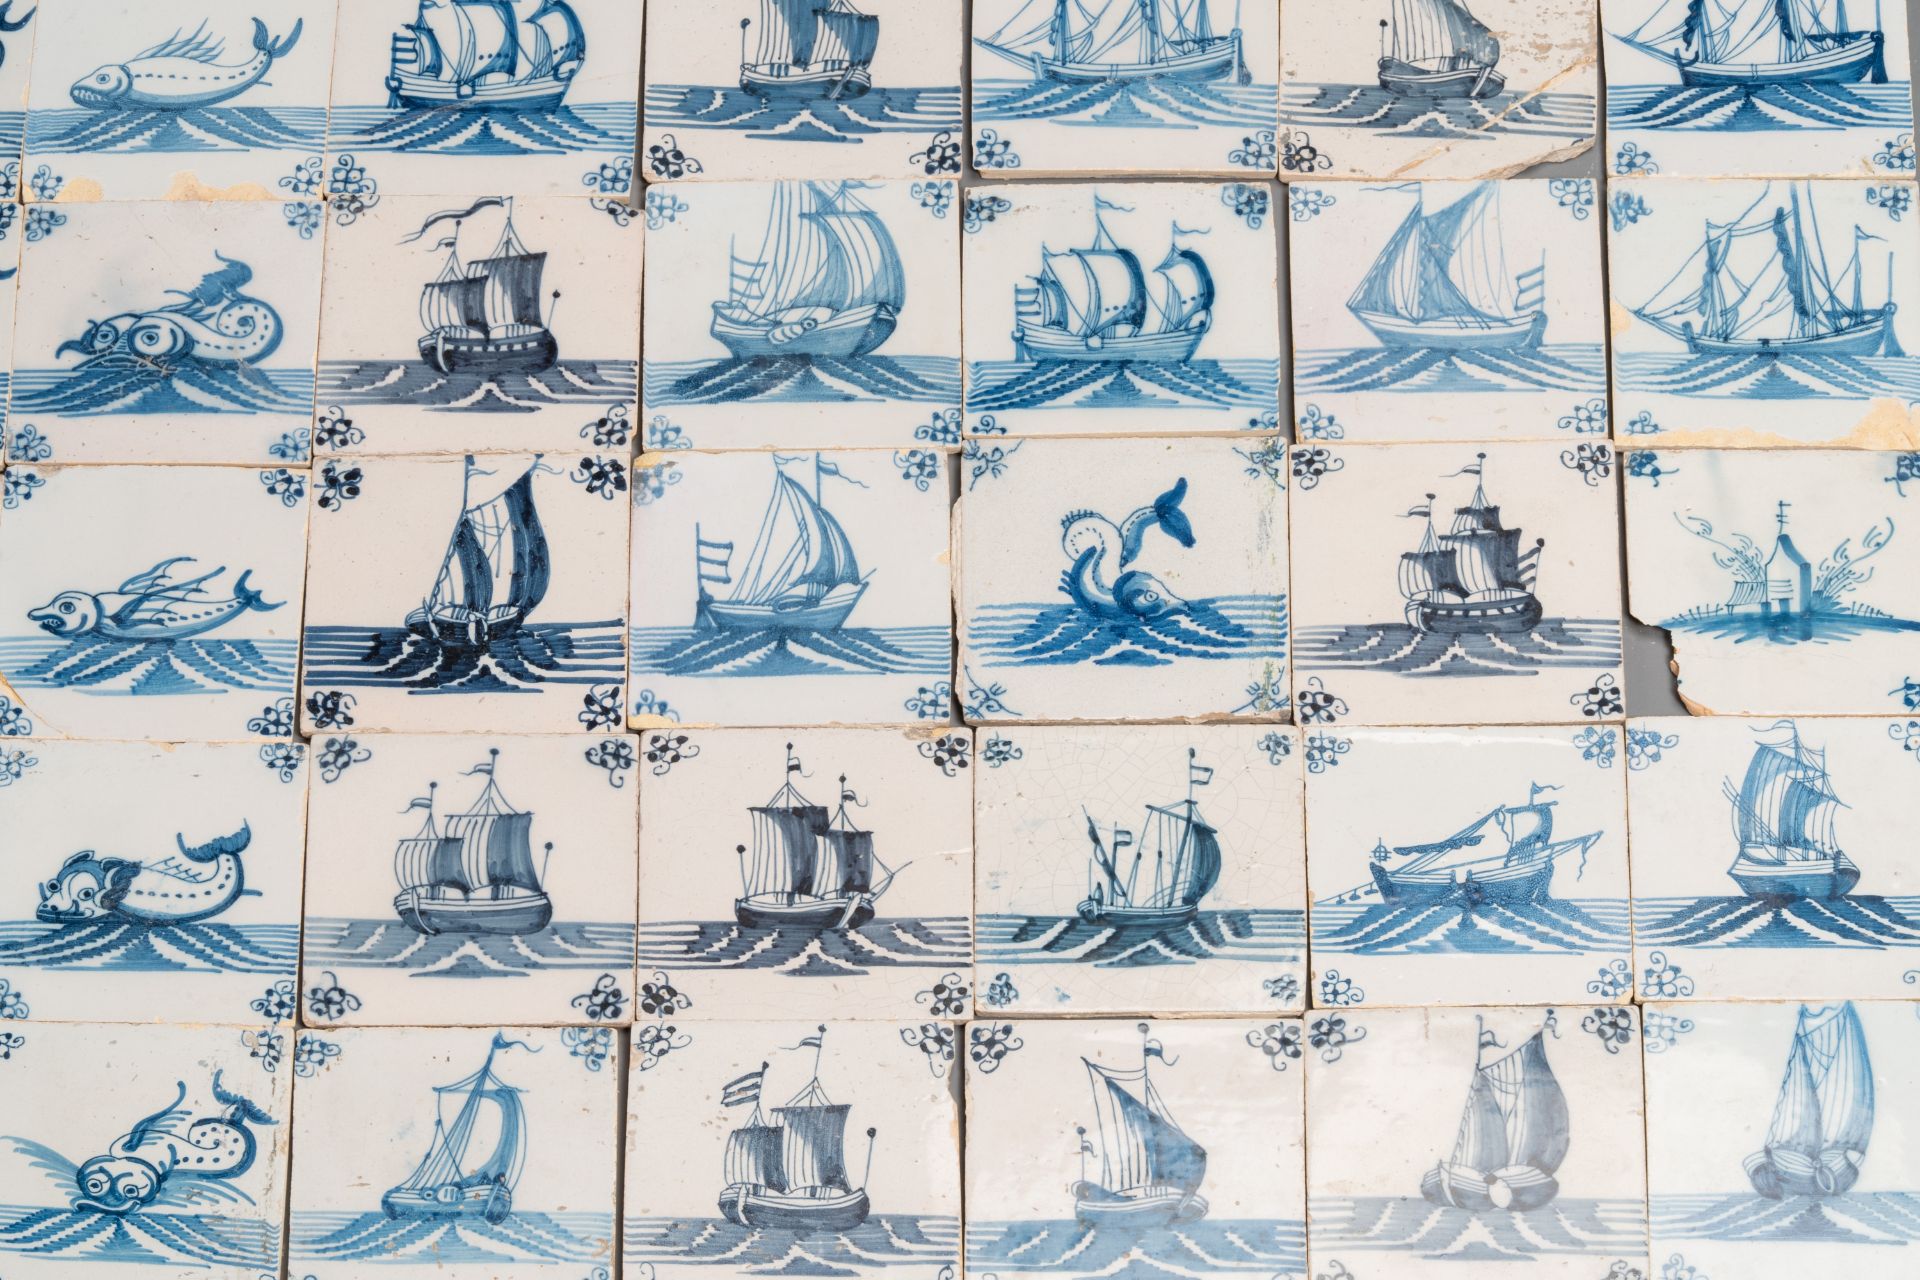 92 blue and white Dutch Delft tiles with sea monsters and ships, 18th C. - Bild 15 aus 16